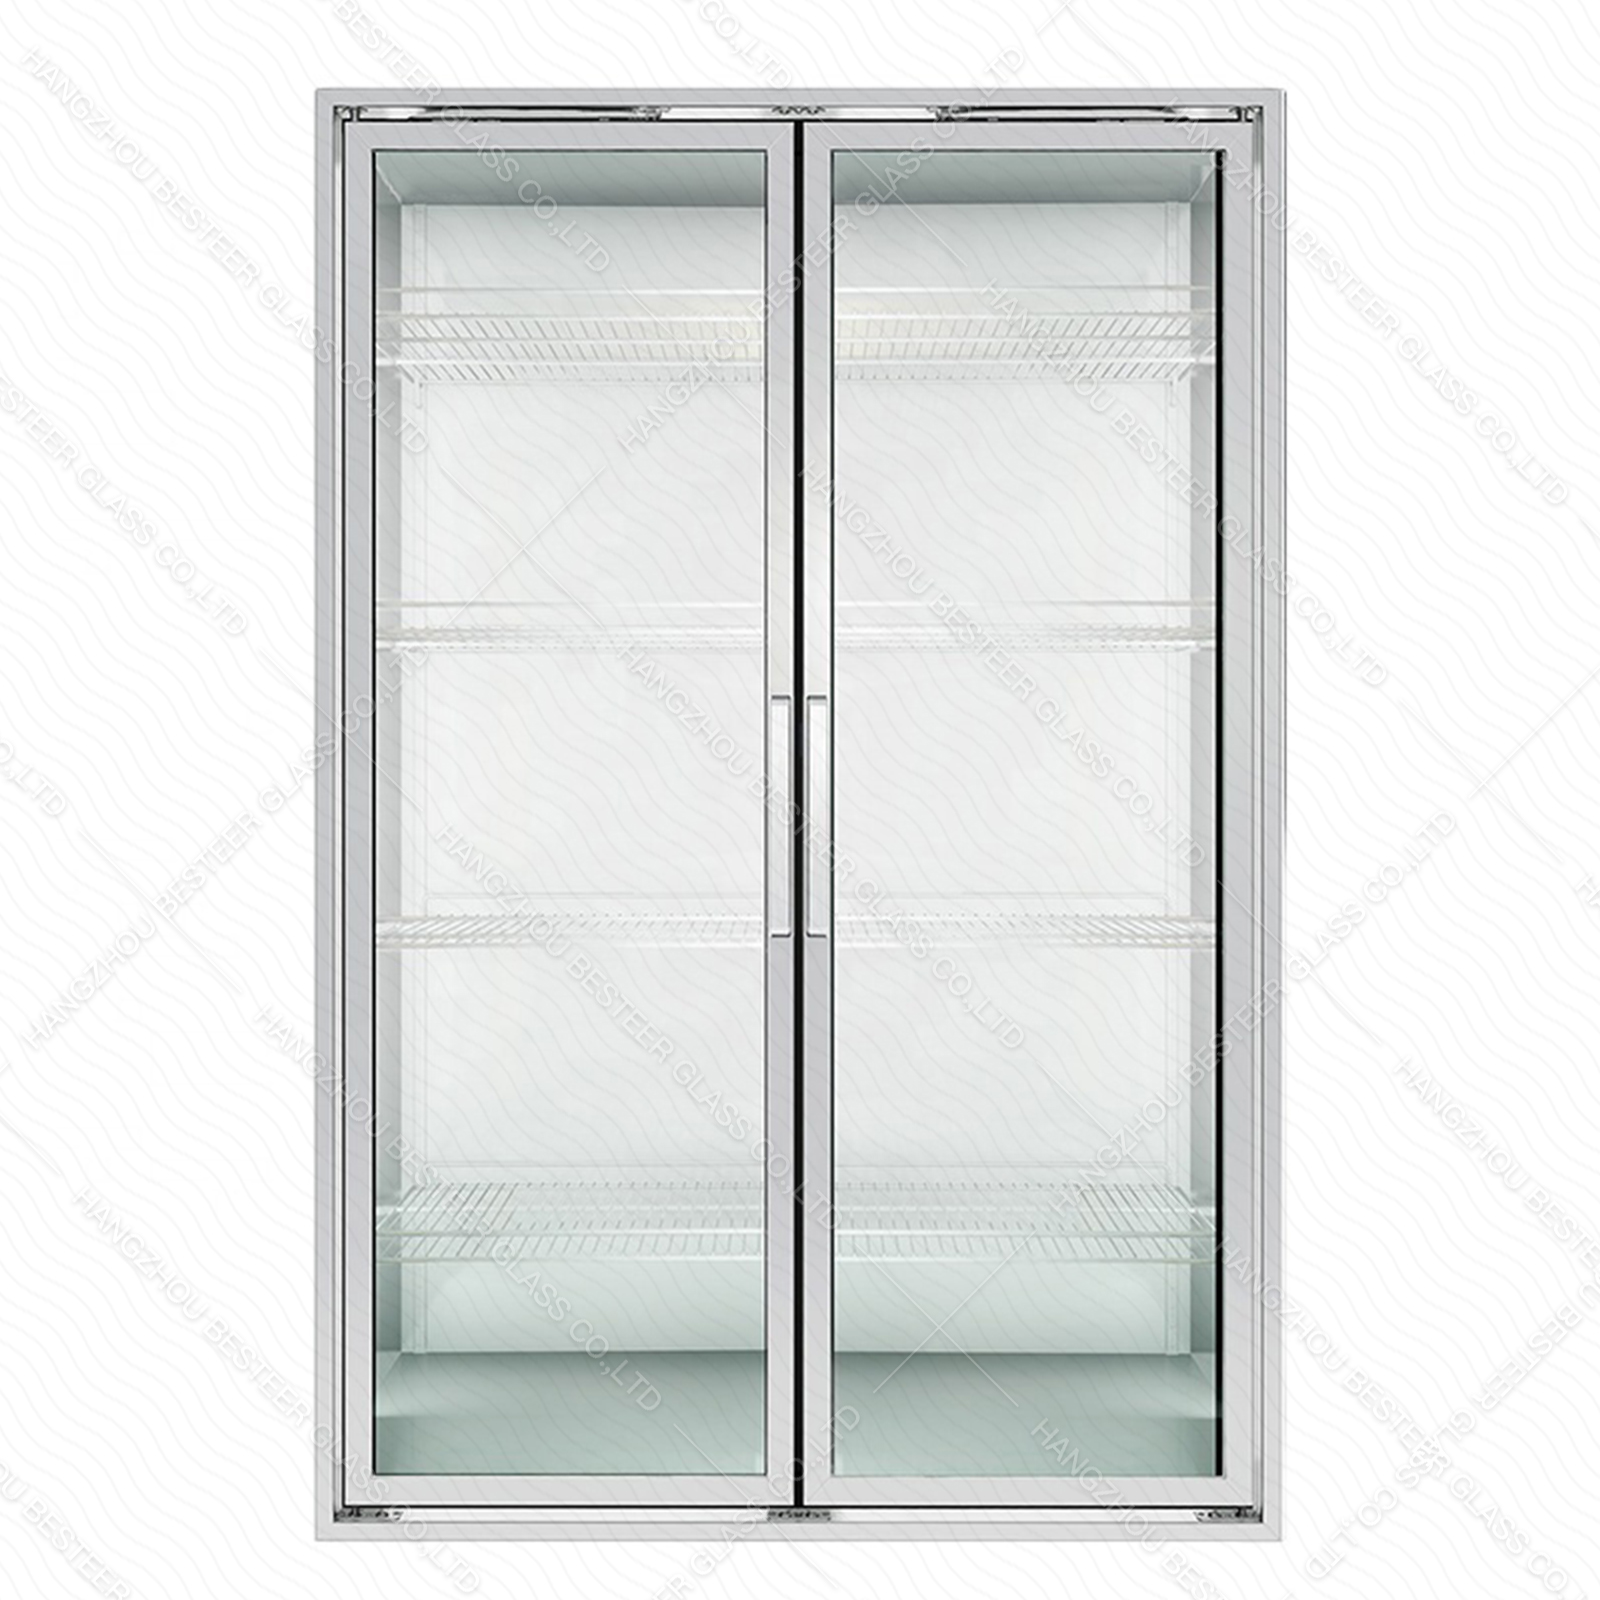 Side by Side Aluminum Frame Display Glass Door for Cold Room System